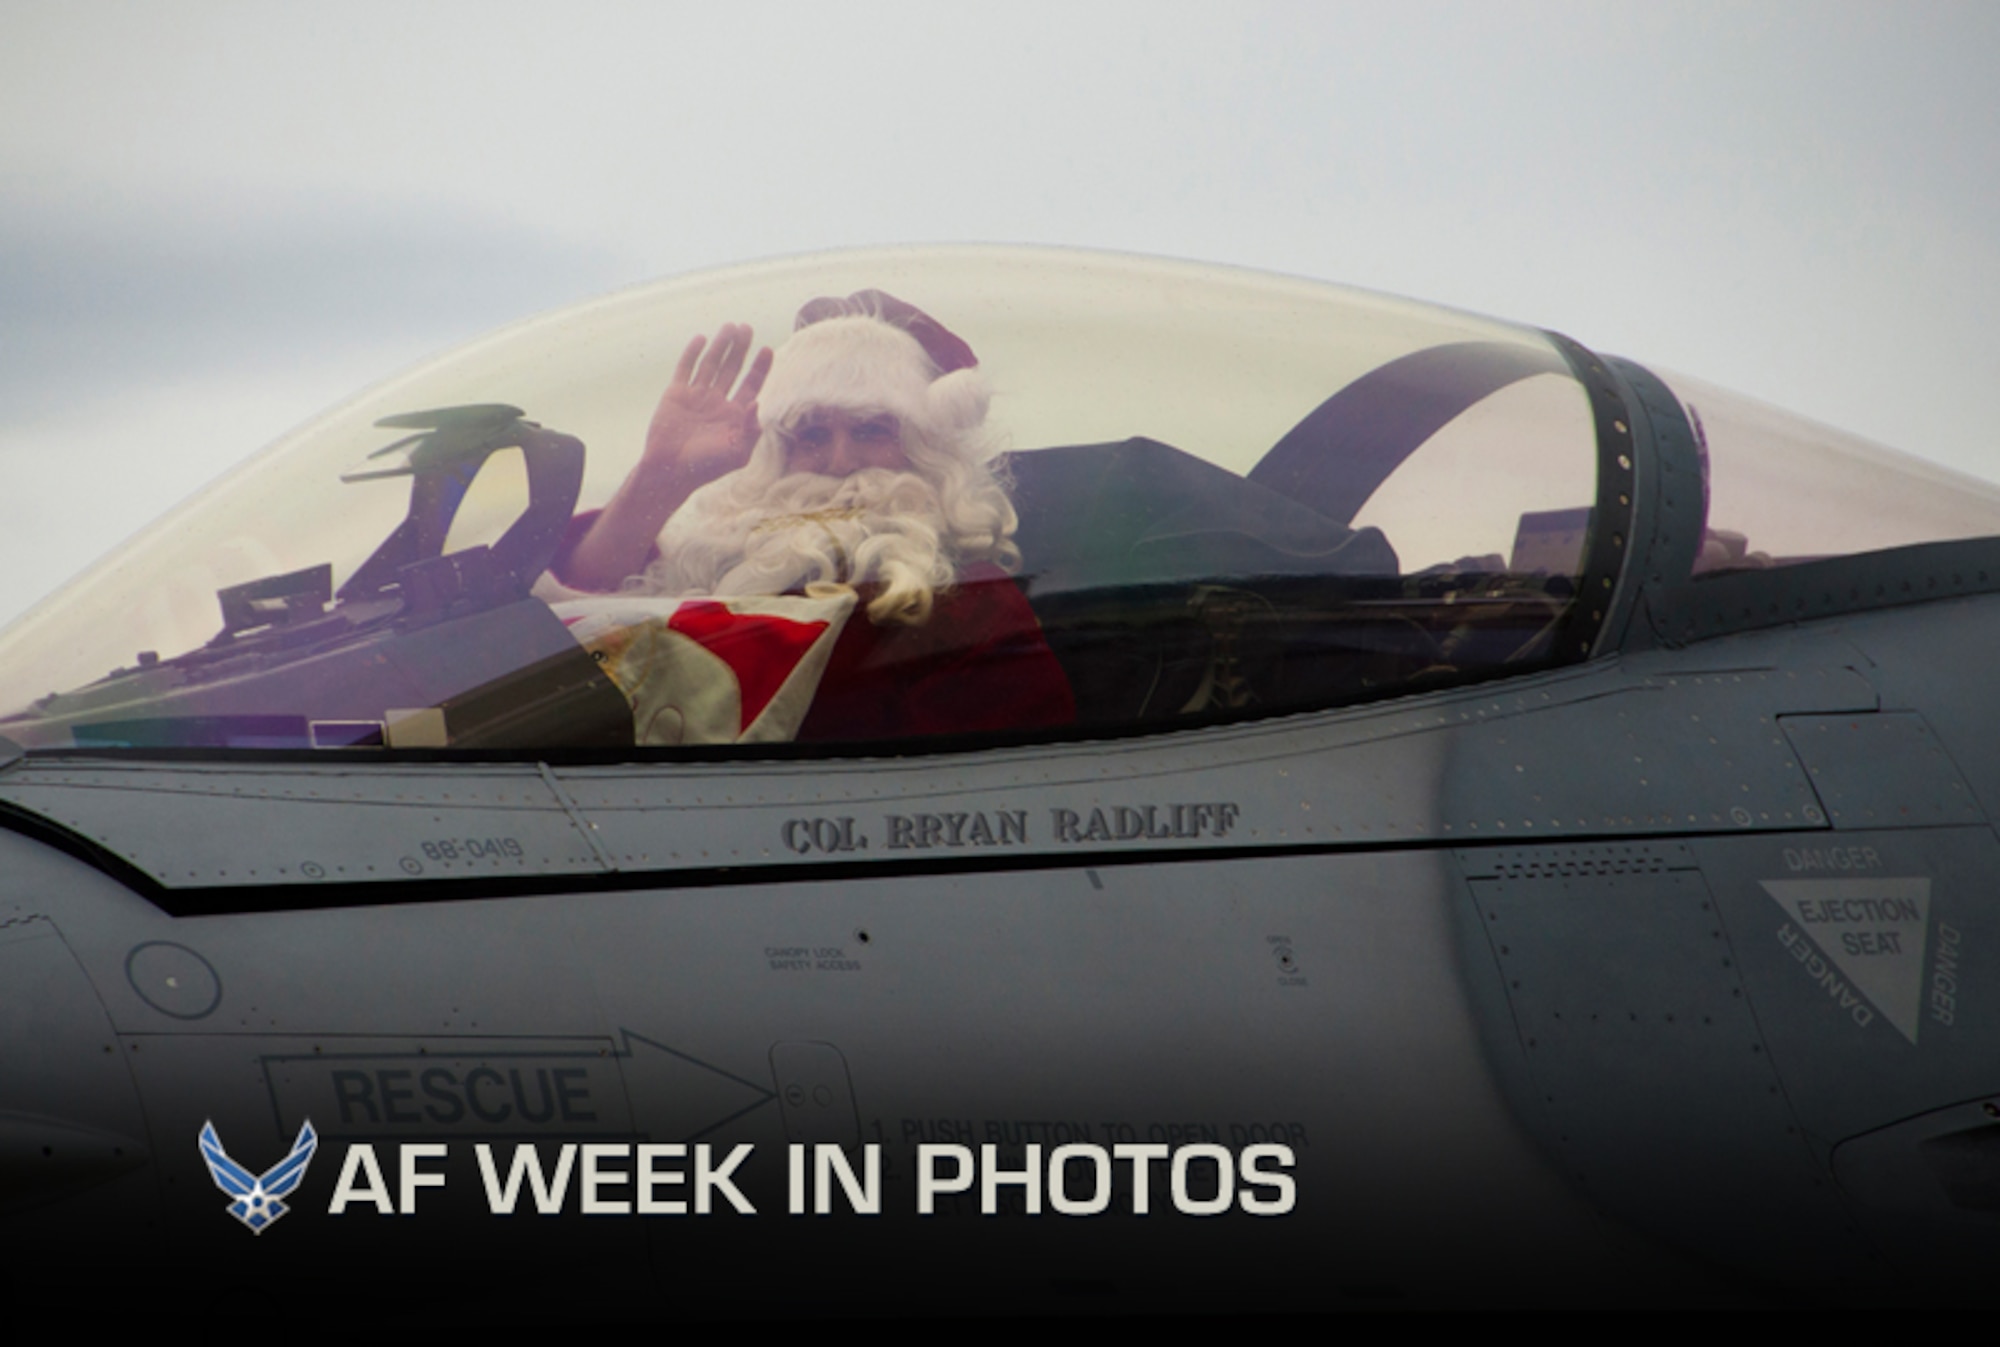 Santa, played by Col. Bryan Radliff, arrives in an F-16 Fighting Falcon to the 419th Fighter Wing Christmas party at Hill Air Force Base, Utah, Dec. 2, 2012. Radliff is the 419th FW commander. (U.S. Air Force photo/Senior Airman Crystal Charriere)